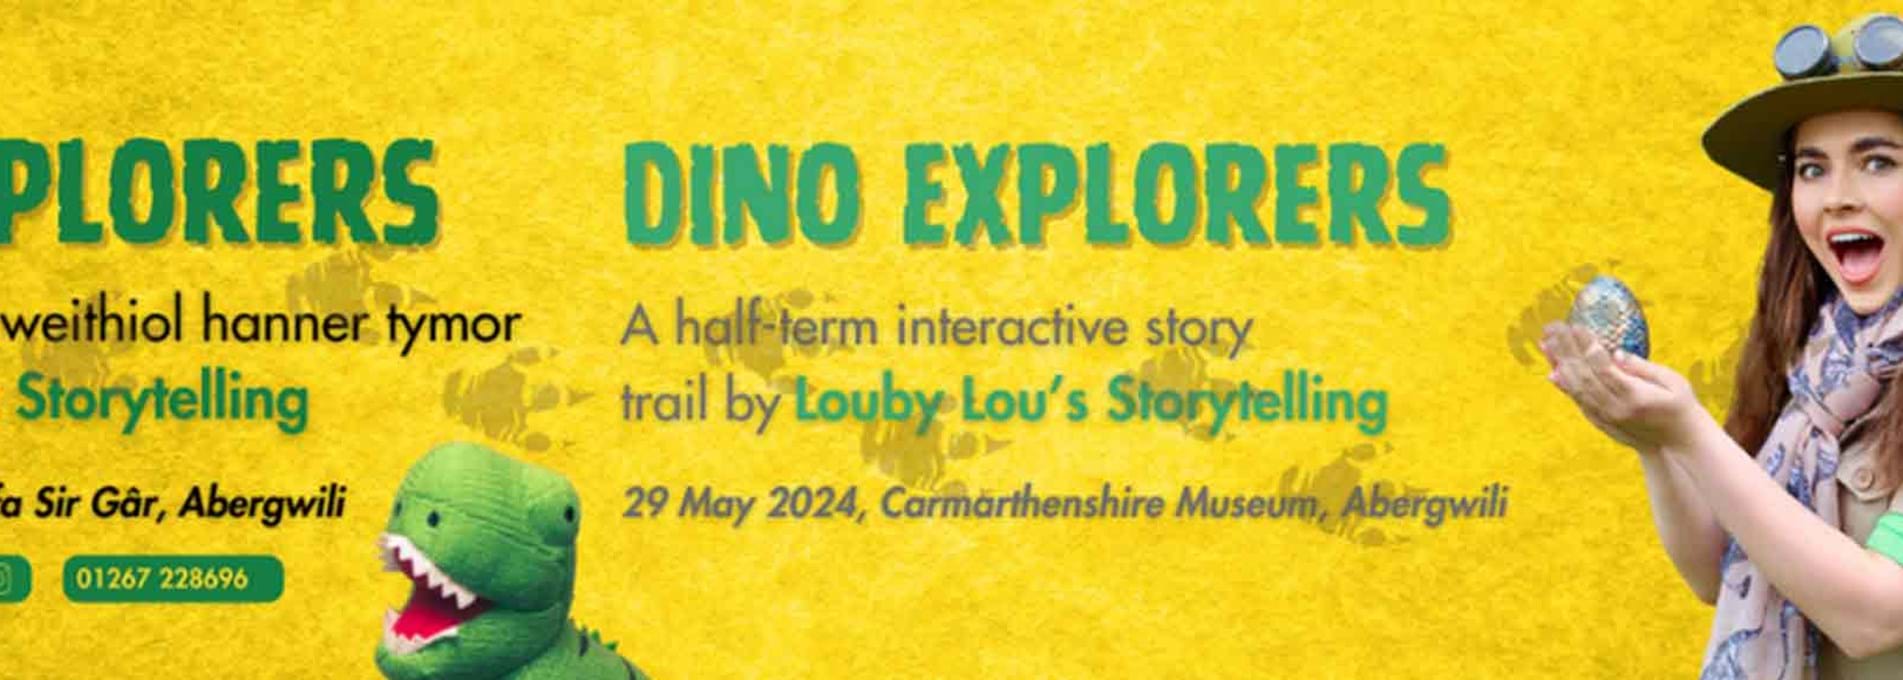 Dino Explorers: A half-term interactive trail by Louby Lou's Storytelling